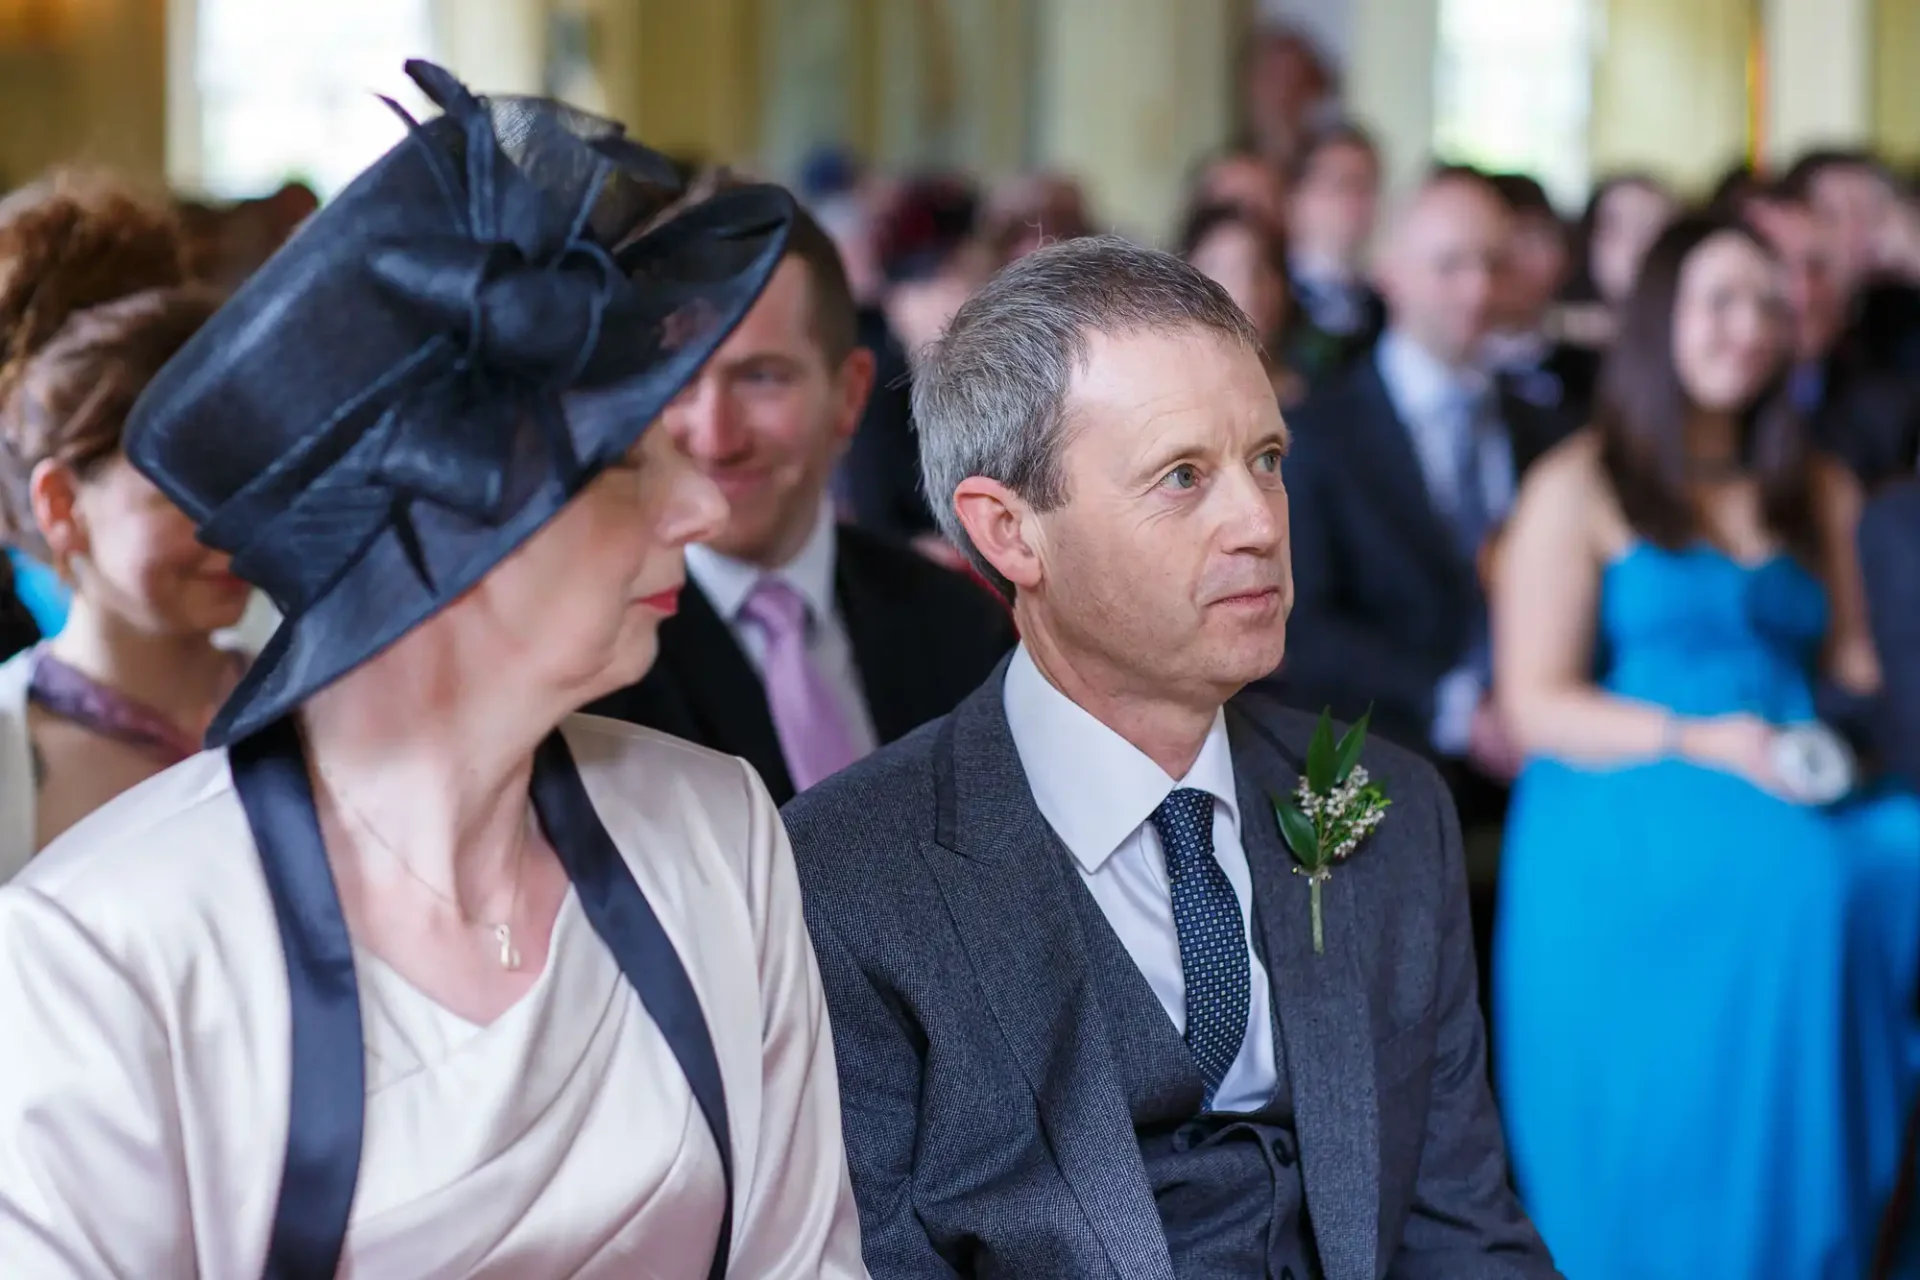 A man and a woman, dressed in formal attire, attentively watching a ceremony. the woman wears a black hat, and the man has a flower boutonniere.